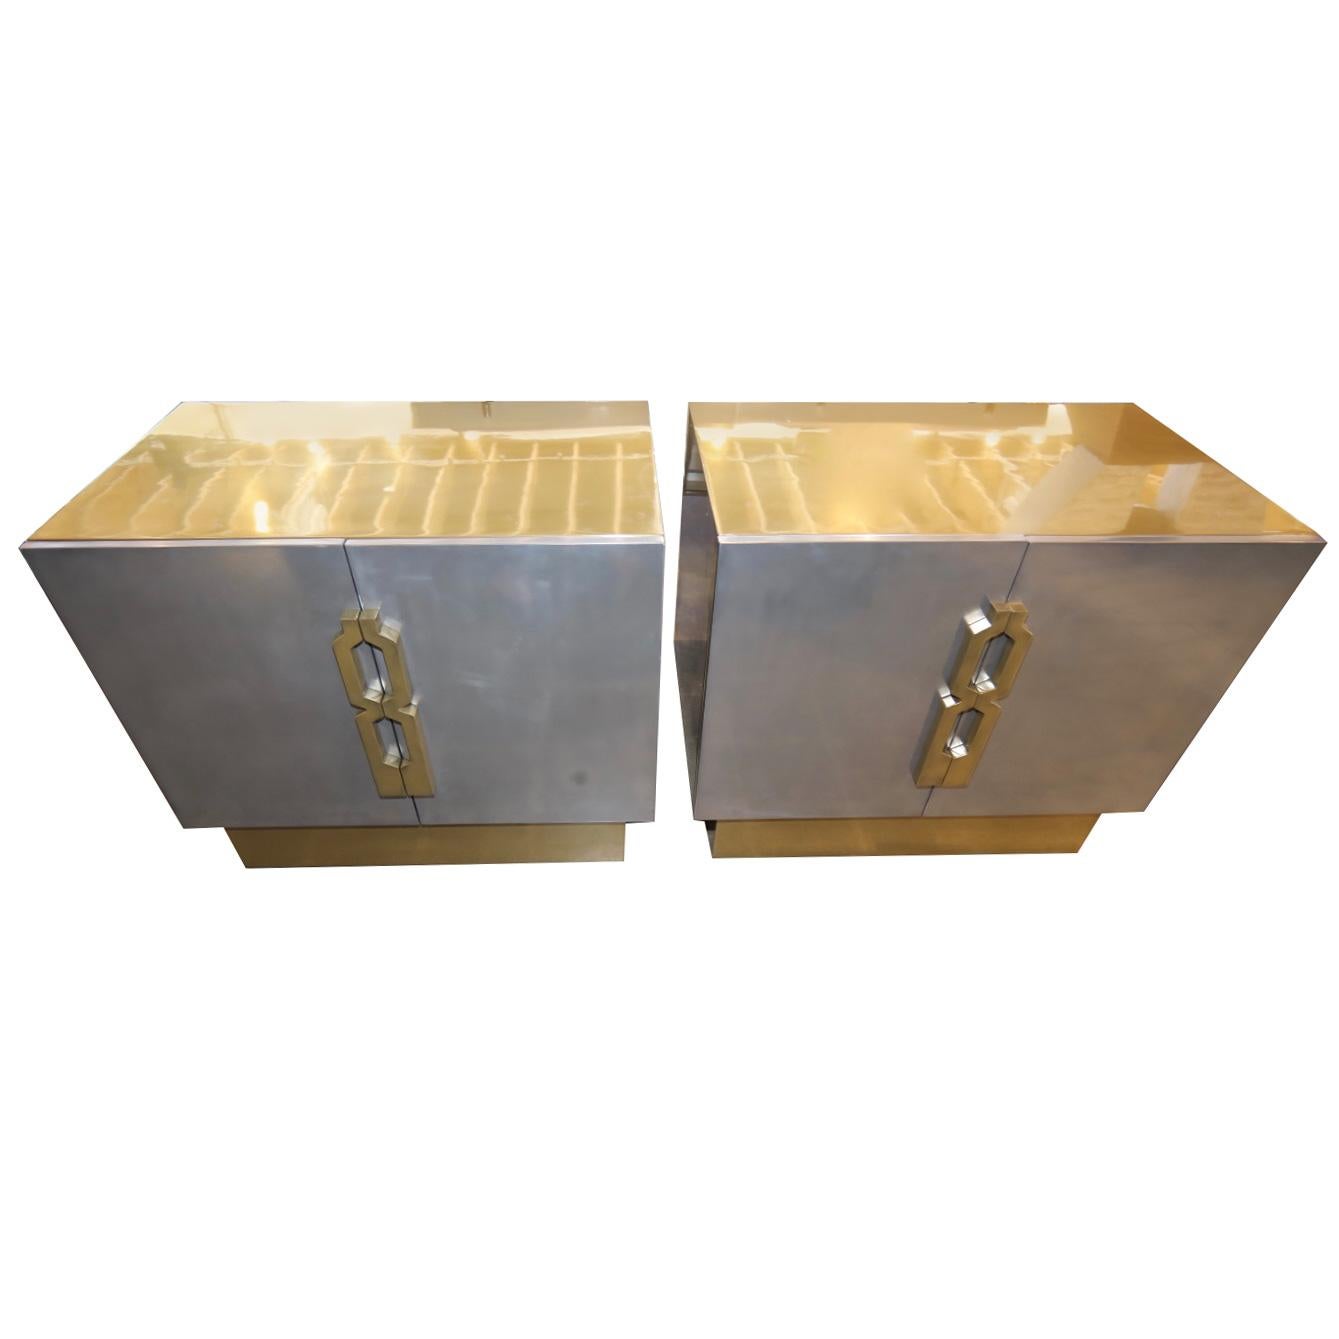 Pair of Geometric Handled Stainless and Brass Nightstands